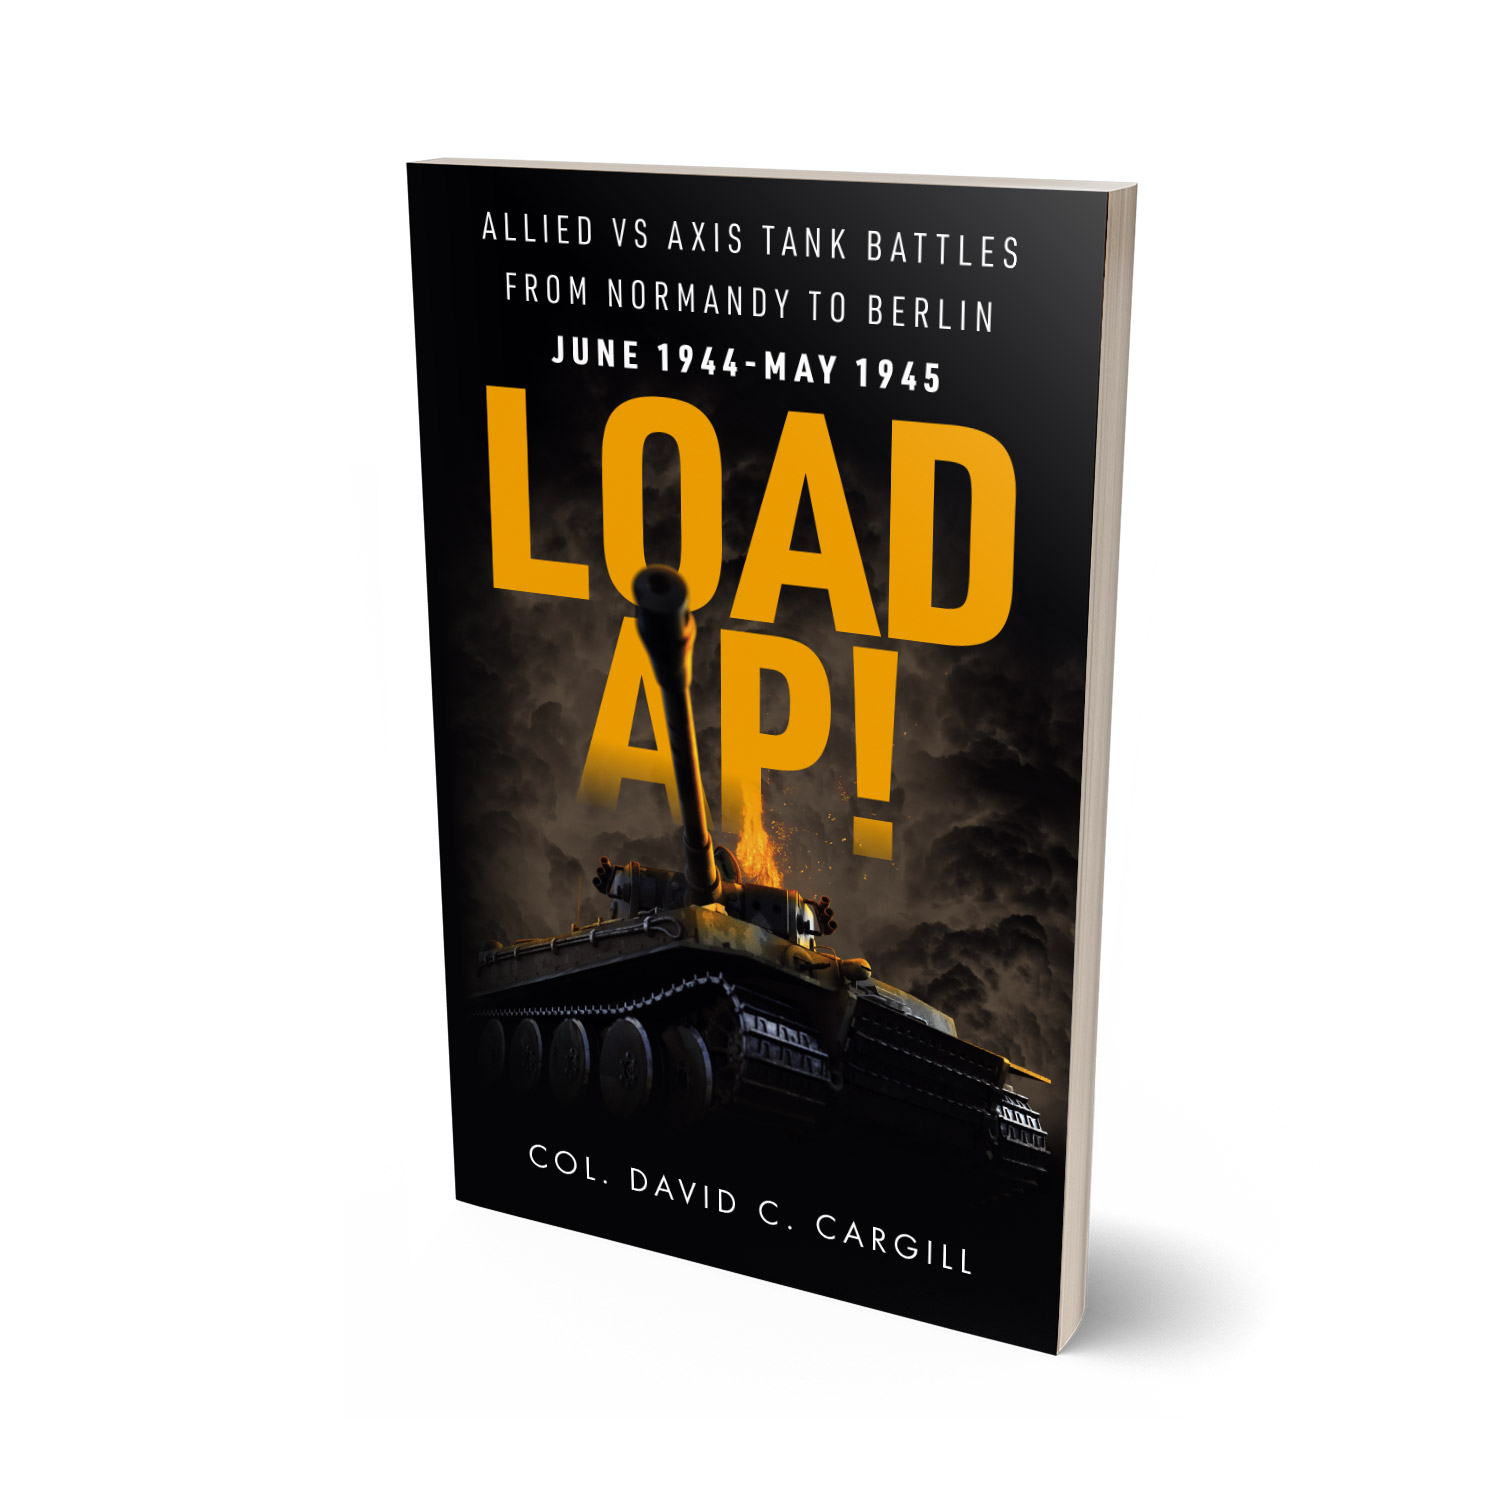 'Load AP!' is a portfolio demo cover by Mark Thomas. To learn more about what Mark could do for your book, please visit coverness.com.